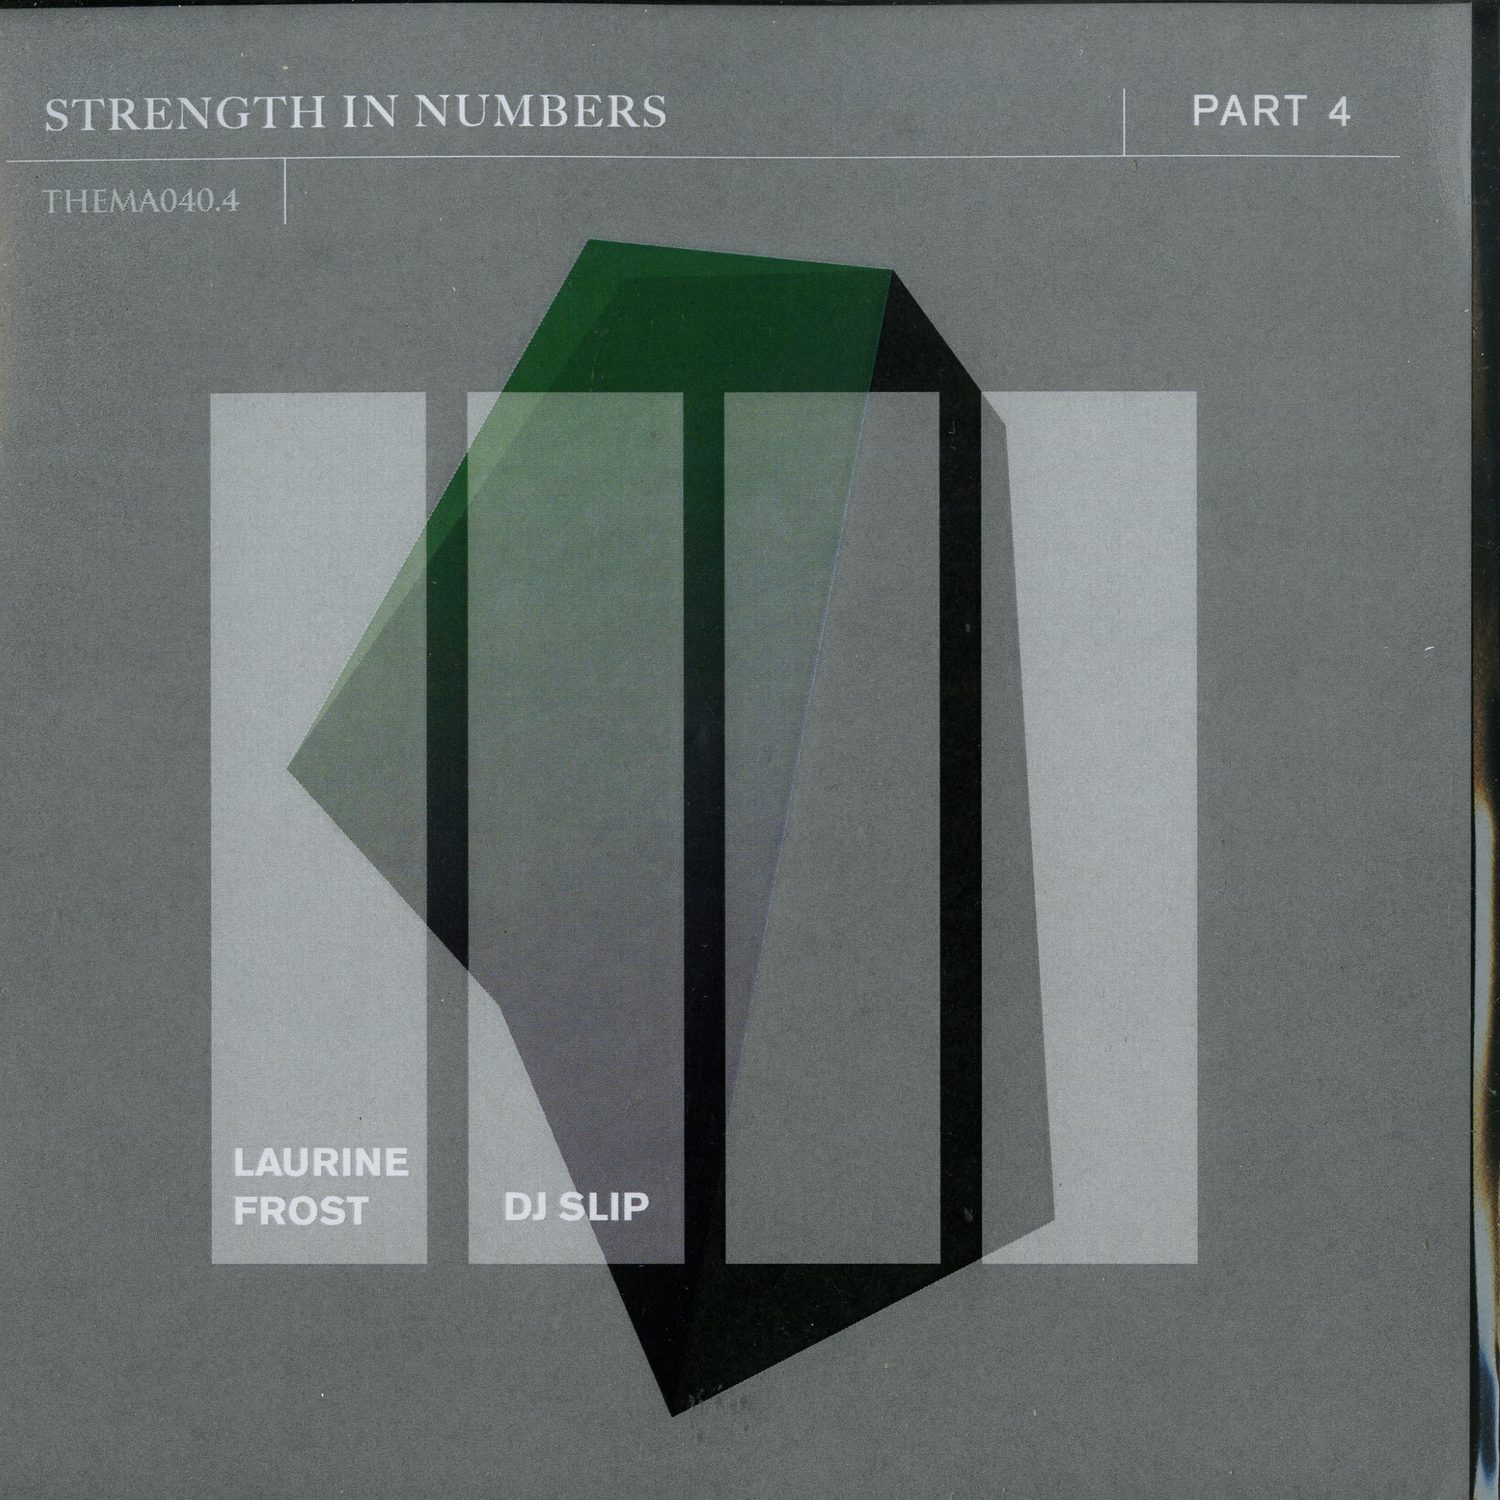 Laurine Frost, DJ Slip - STRENGTH IN NUMBERS PT. 4 